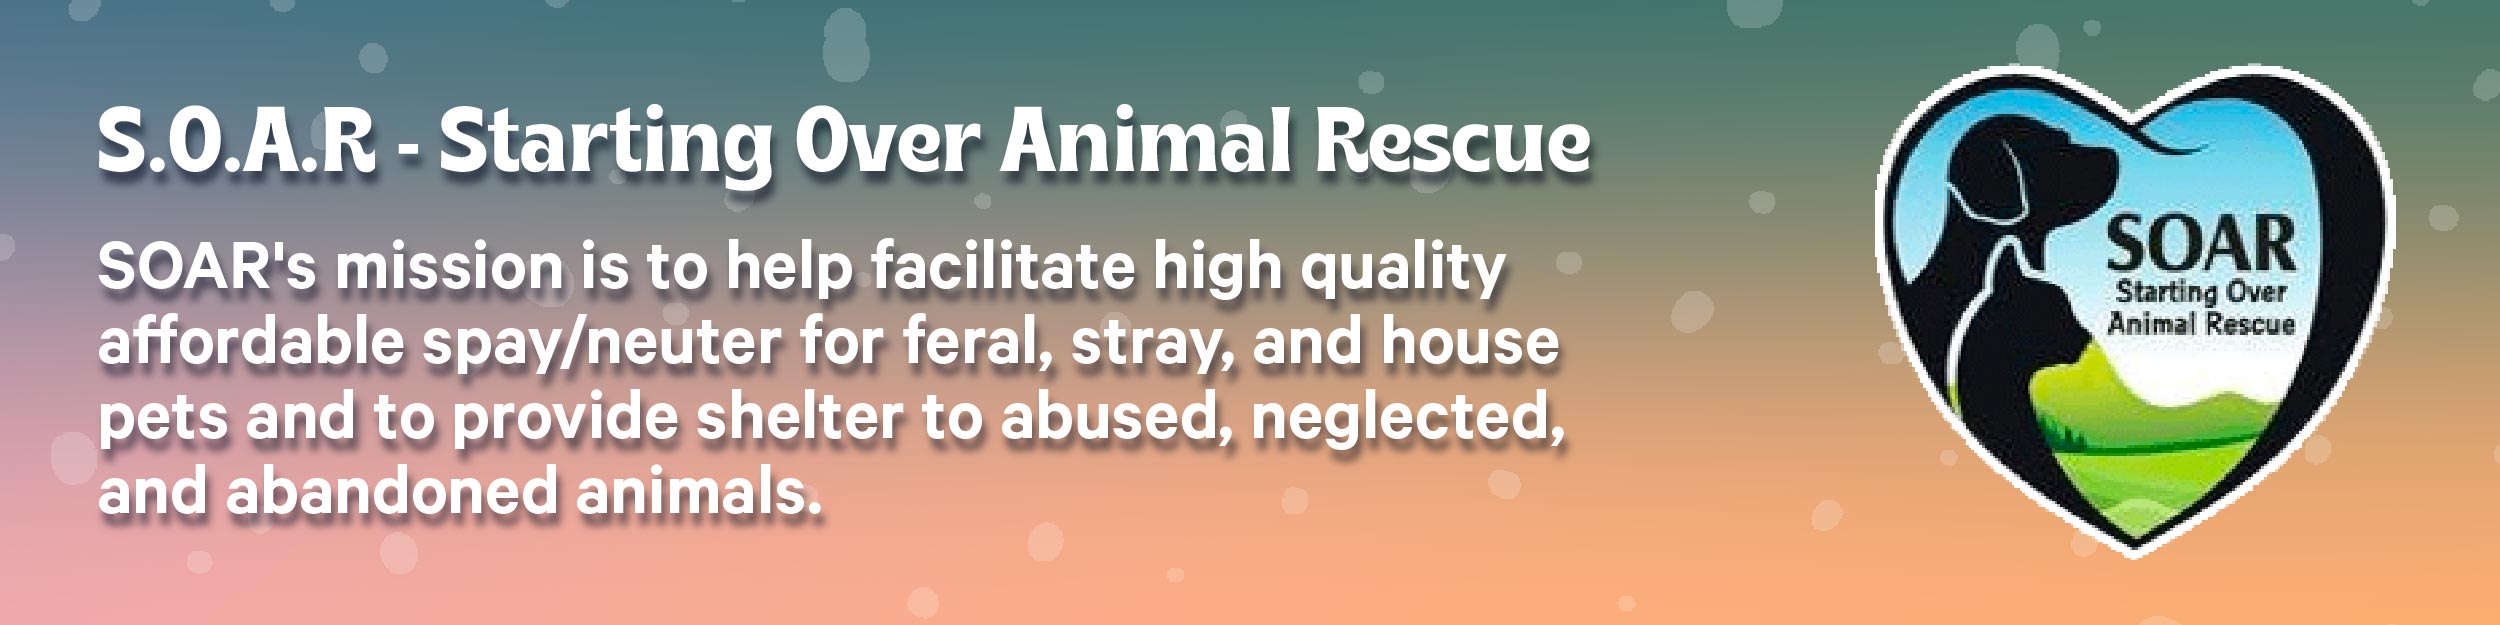 S.O.A.R. - Starting Over Animal Rescue